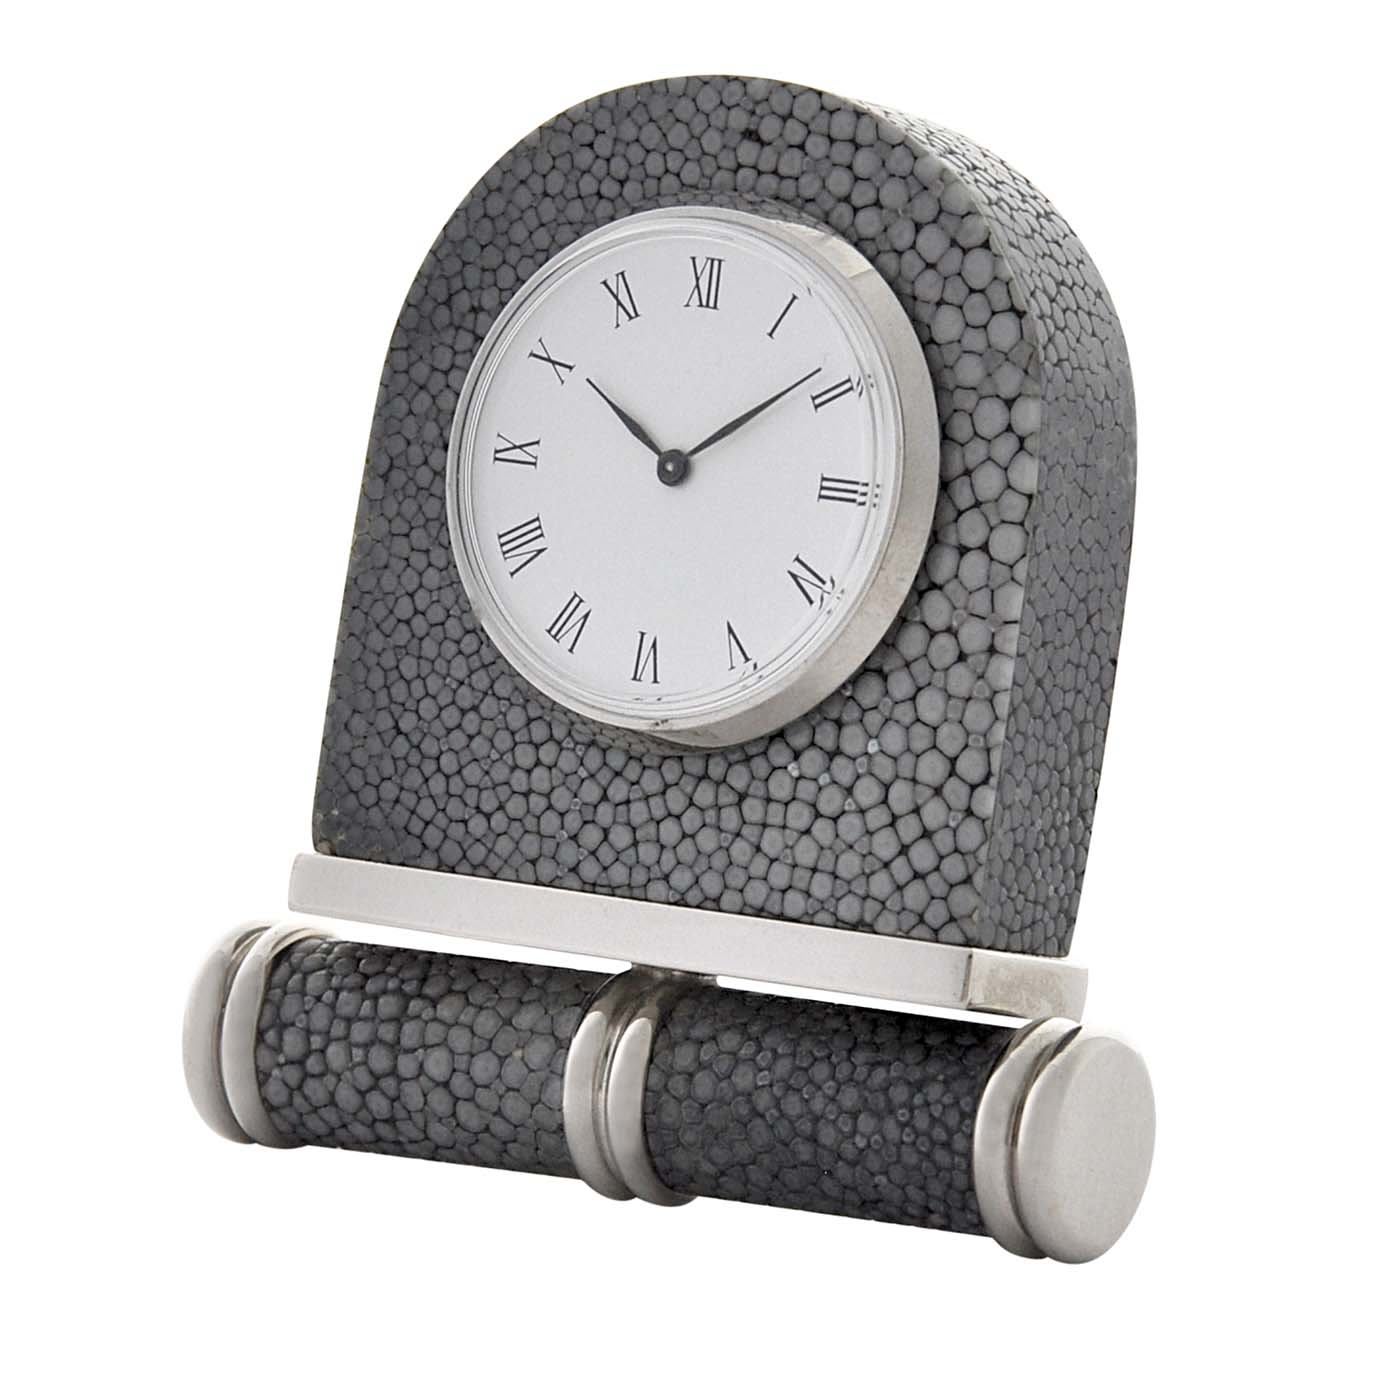 Galucharme Table Watch by Nino Basso - Design Center 1991